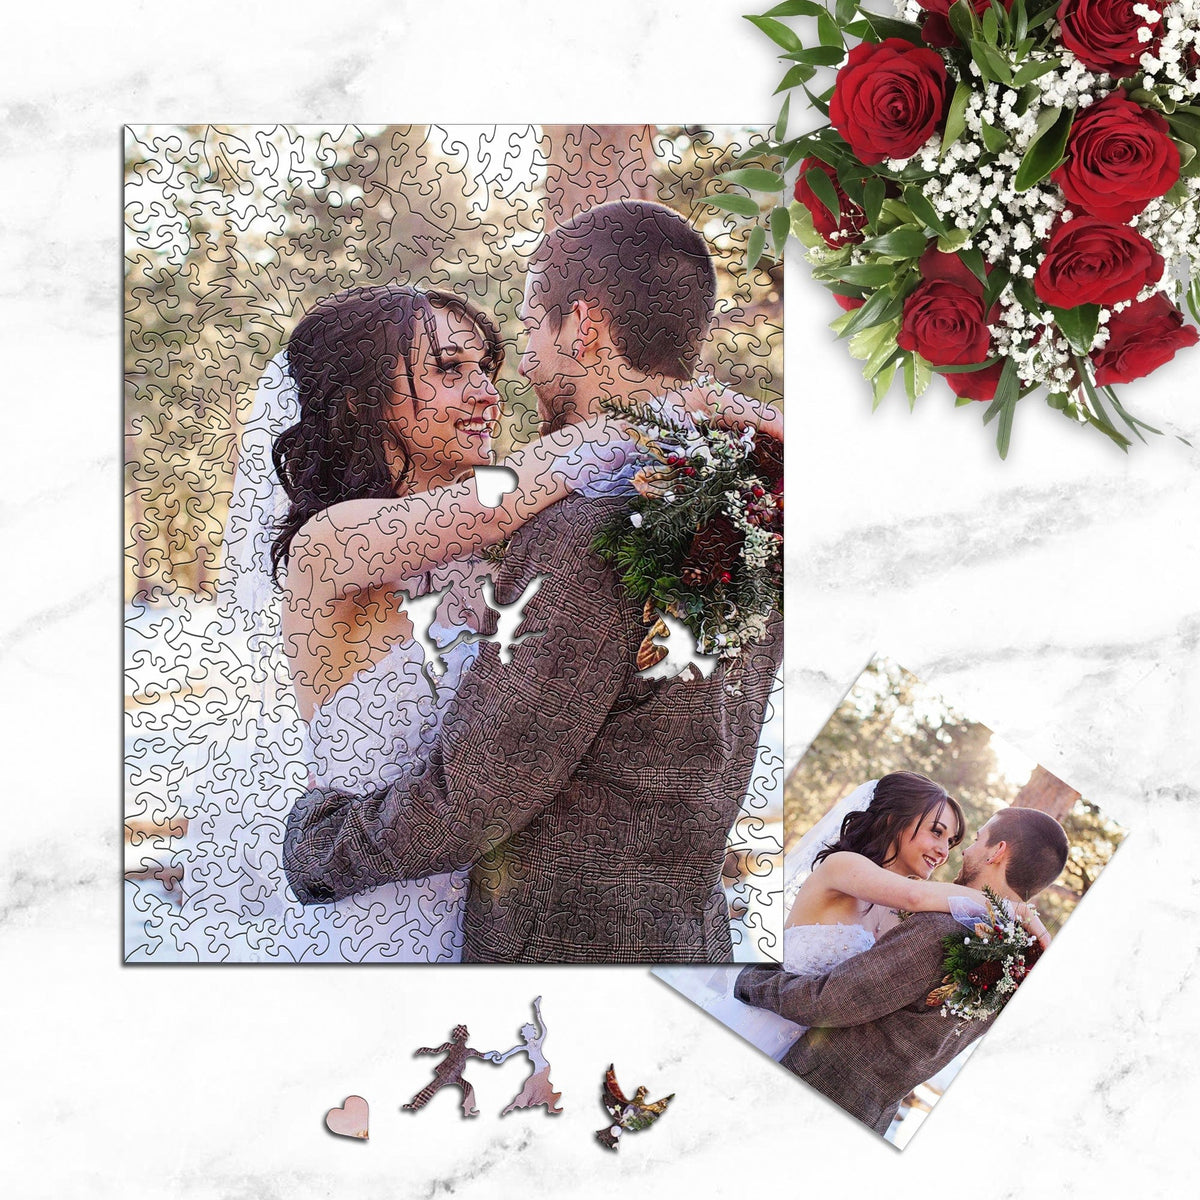 Turn your favorite photo into a wood puzzle. Makes a truly special personalized gift from Personal Prints